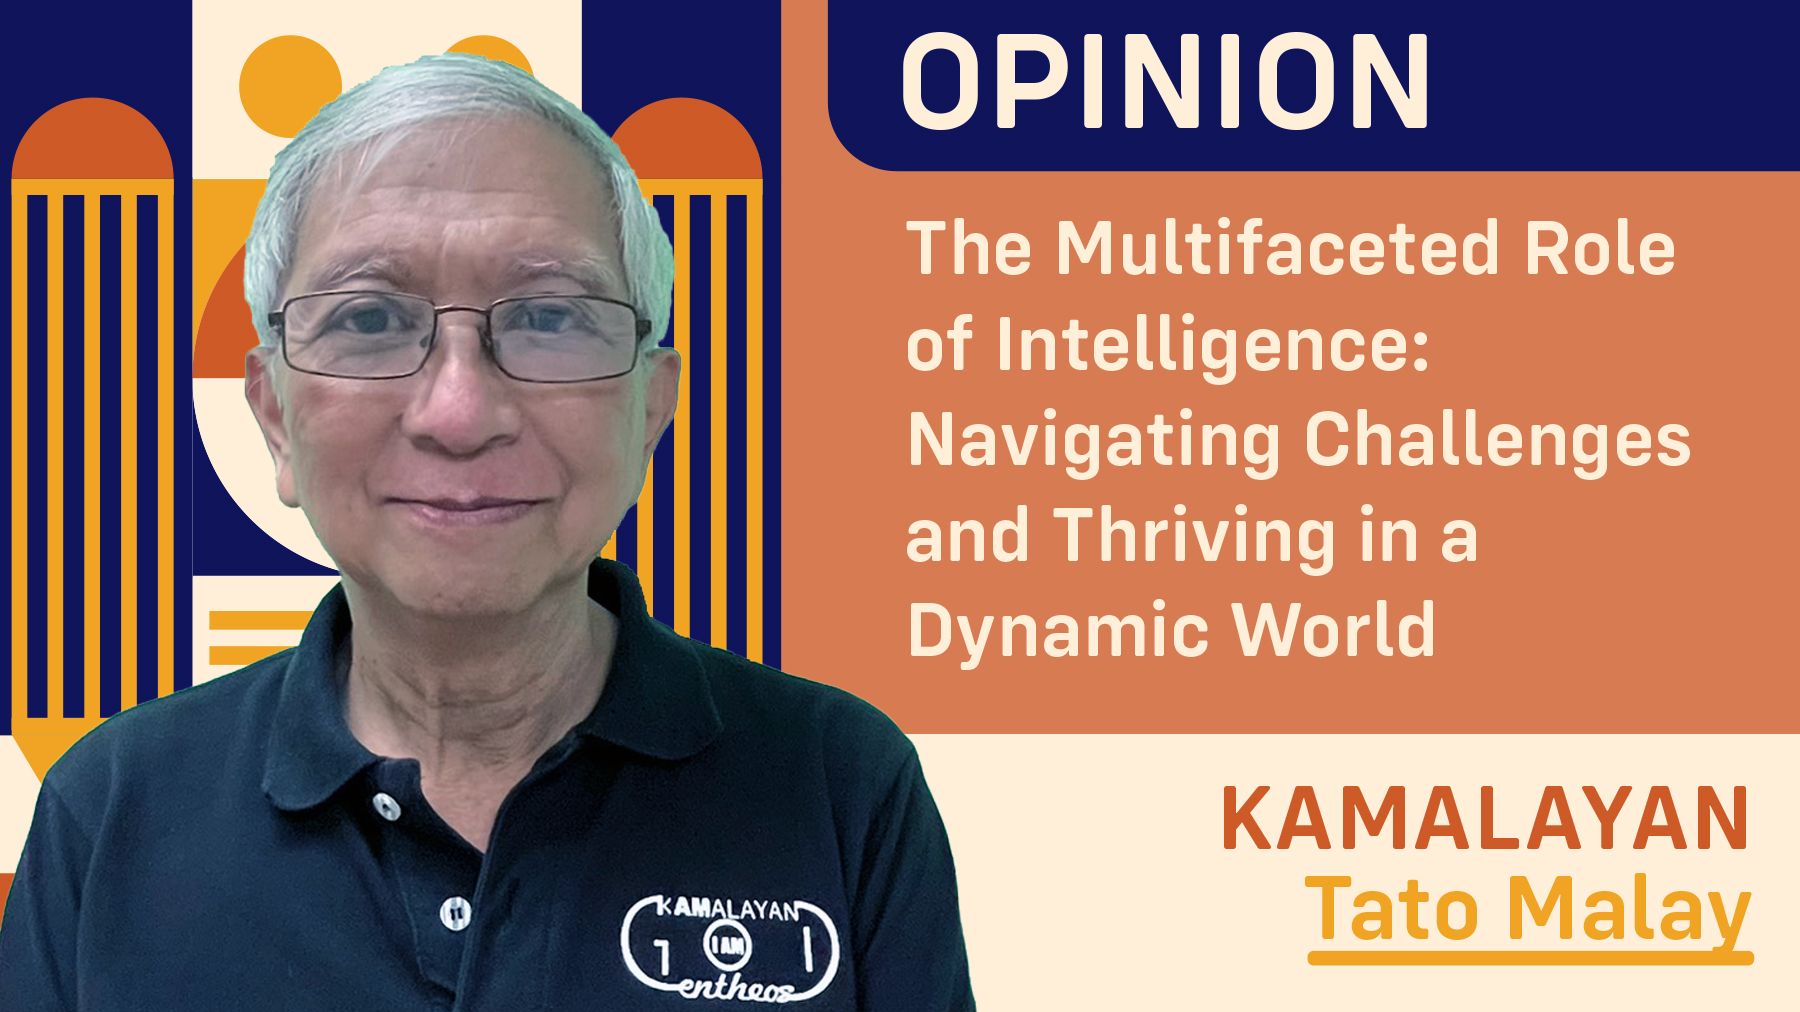 The Multifaceted Role of Intelligence: Navigating Challenges and Thriving in a Dynamic World